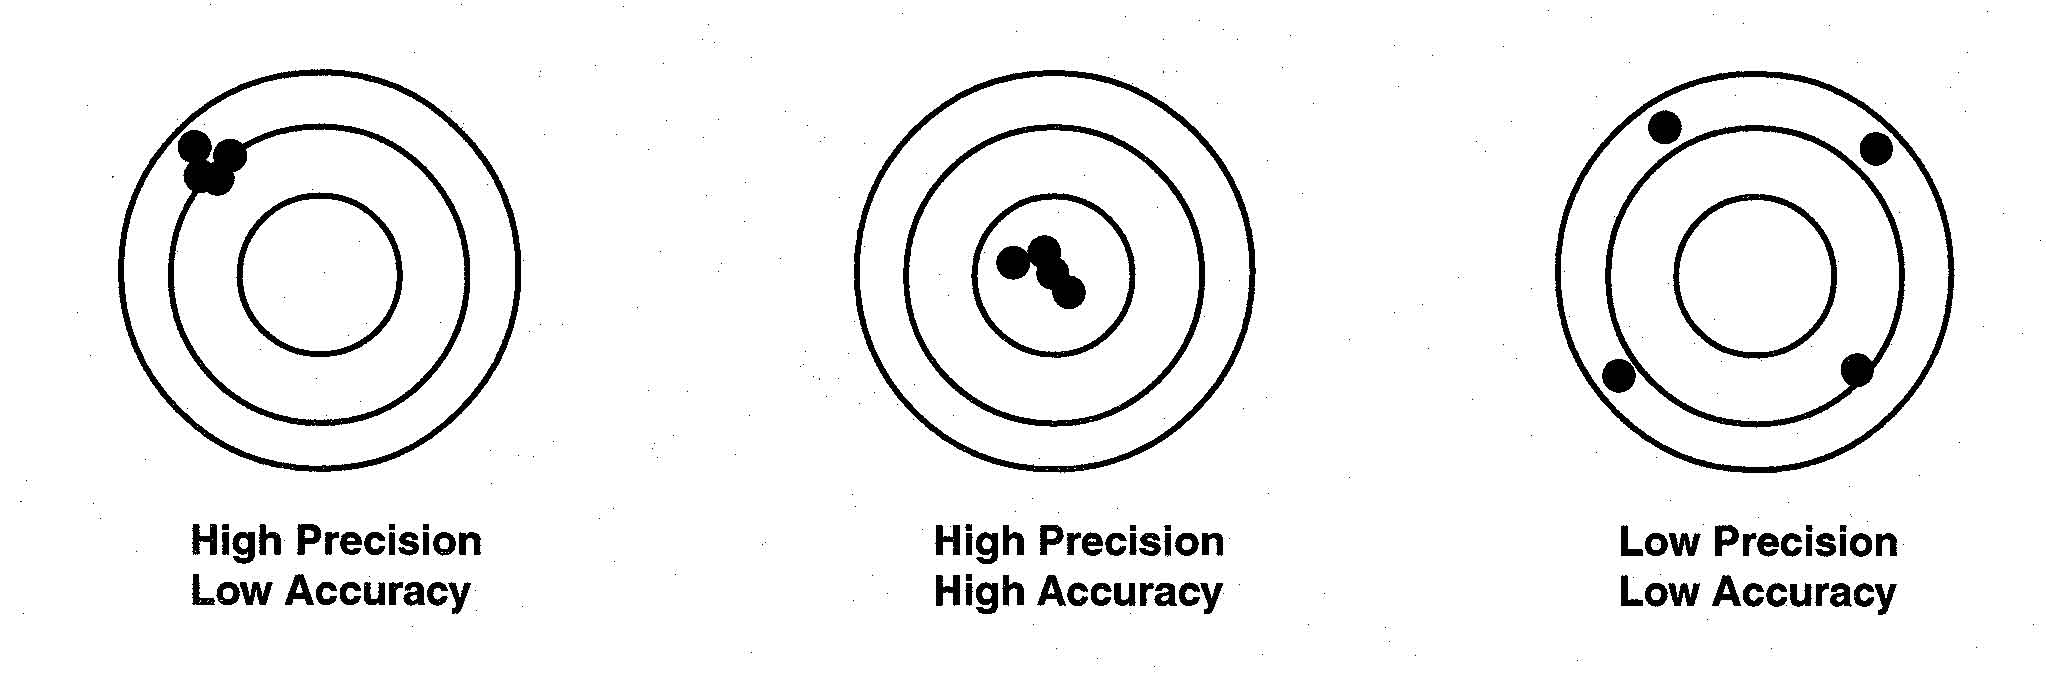 Figure 1. Demonstration of How Random and Systematic Error Affect Precision and Accuracy